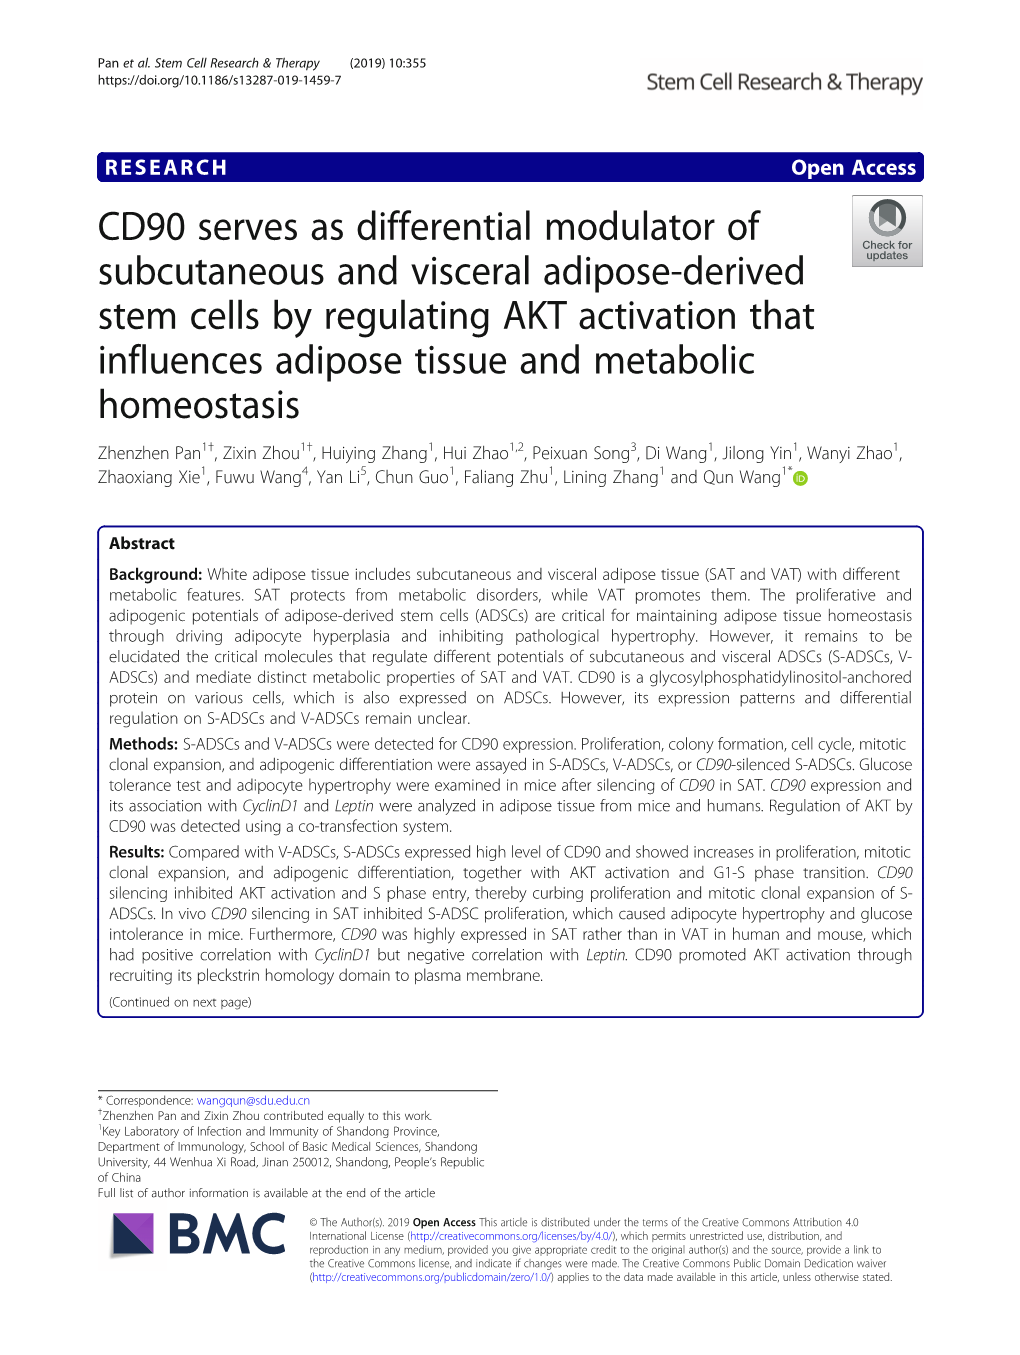 CD90 Serves As Differential Modulator of Subcutaneous and Visceral